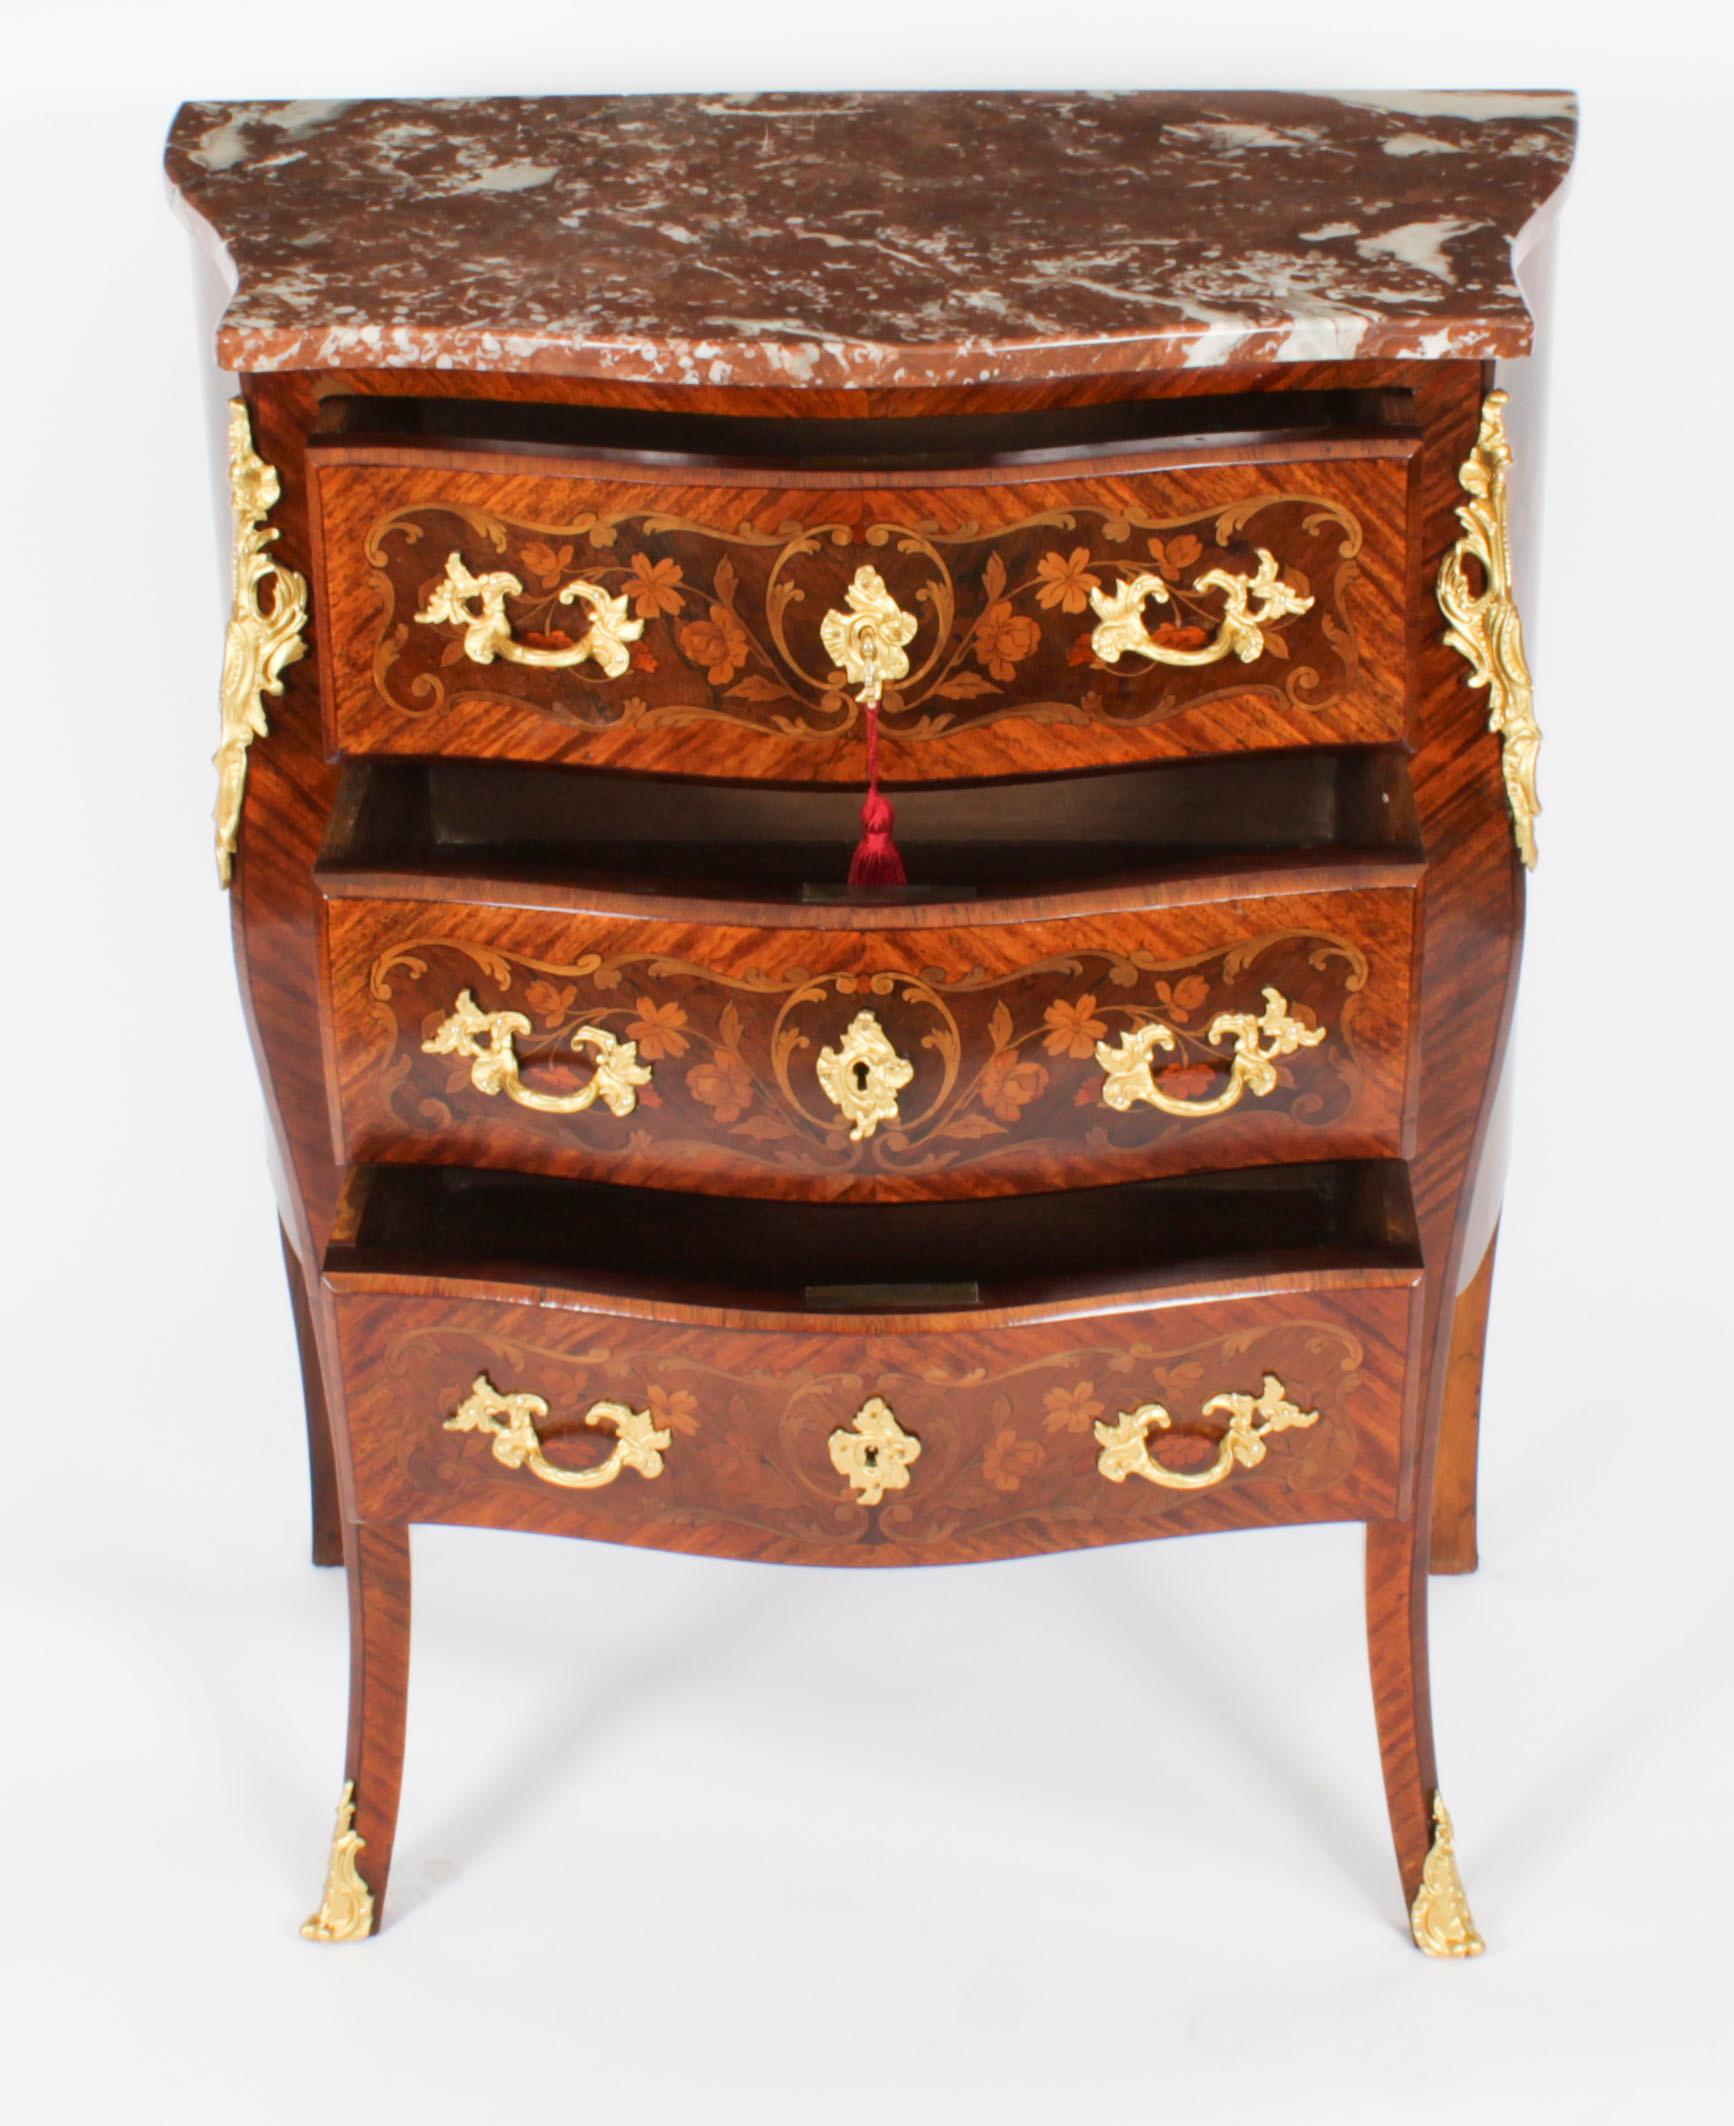 Antique French Louis Revival Walnut Marquetry Commode 19th Century For Sale 11